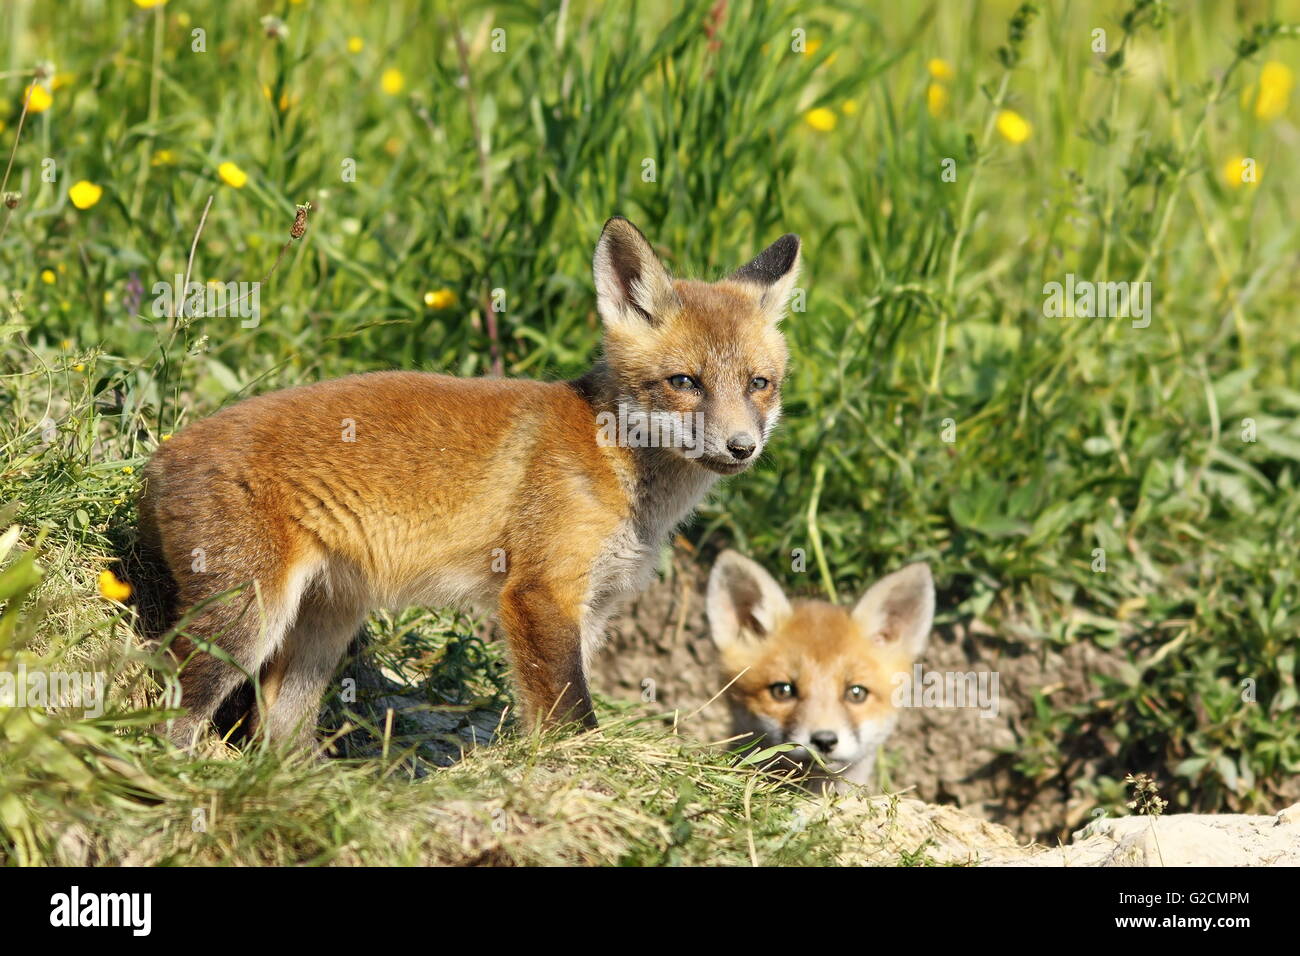 european fox cubs outside the burrow ( Vulpes vulpes ); they like to explore she surroundings while mother vixen is gone hunting Stock Photo